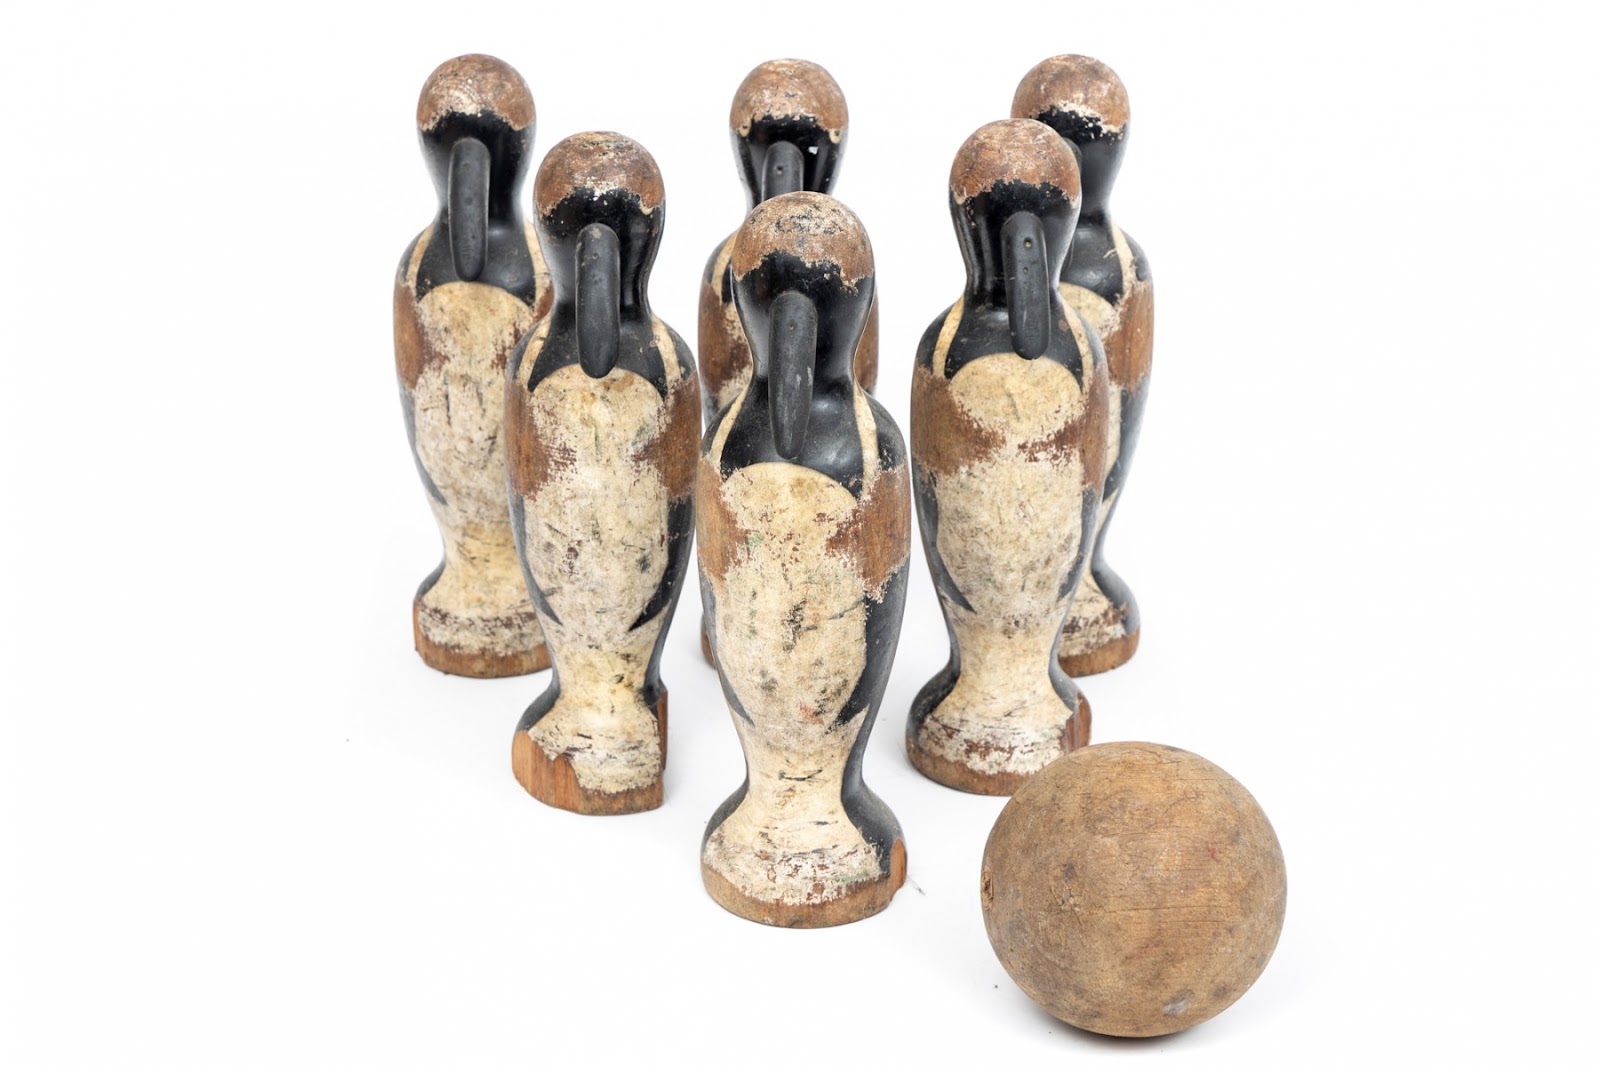 Vintage, Rustic Folk Art Penguin Form Bowling Set with 6 Pins and a Ball 